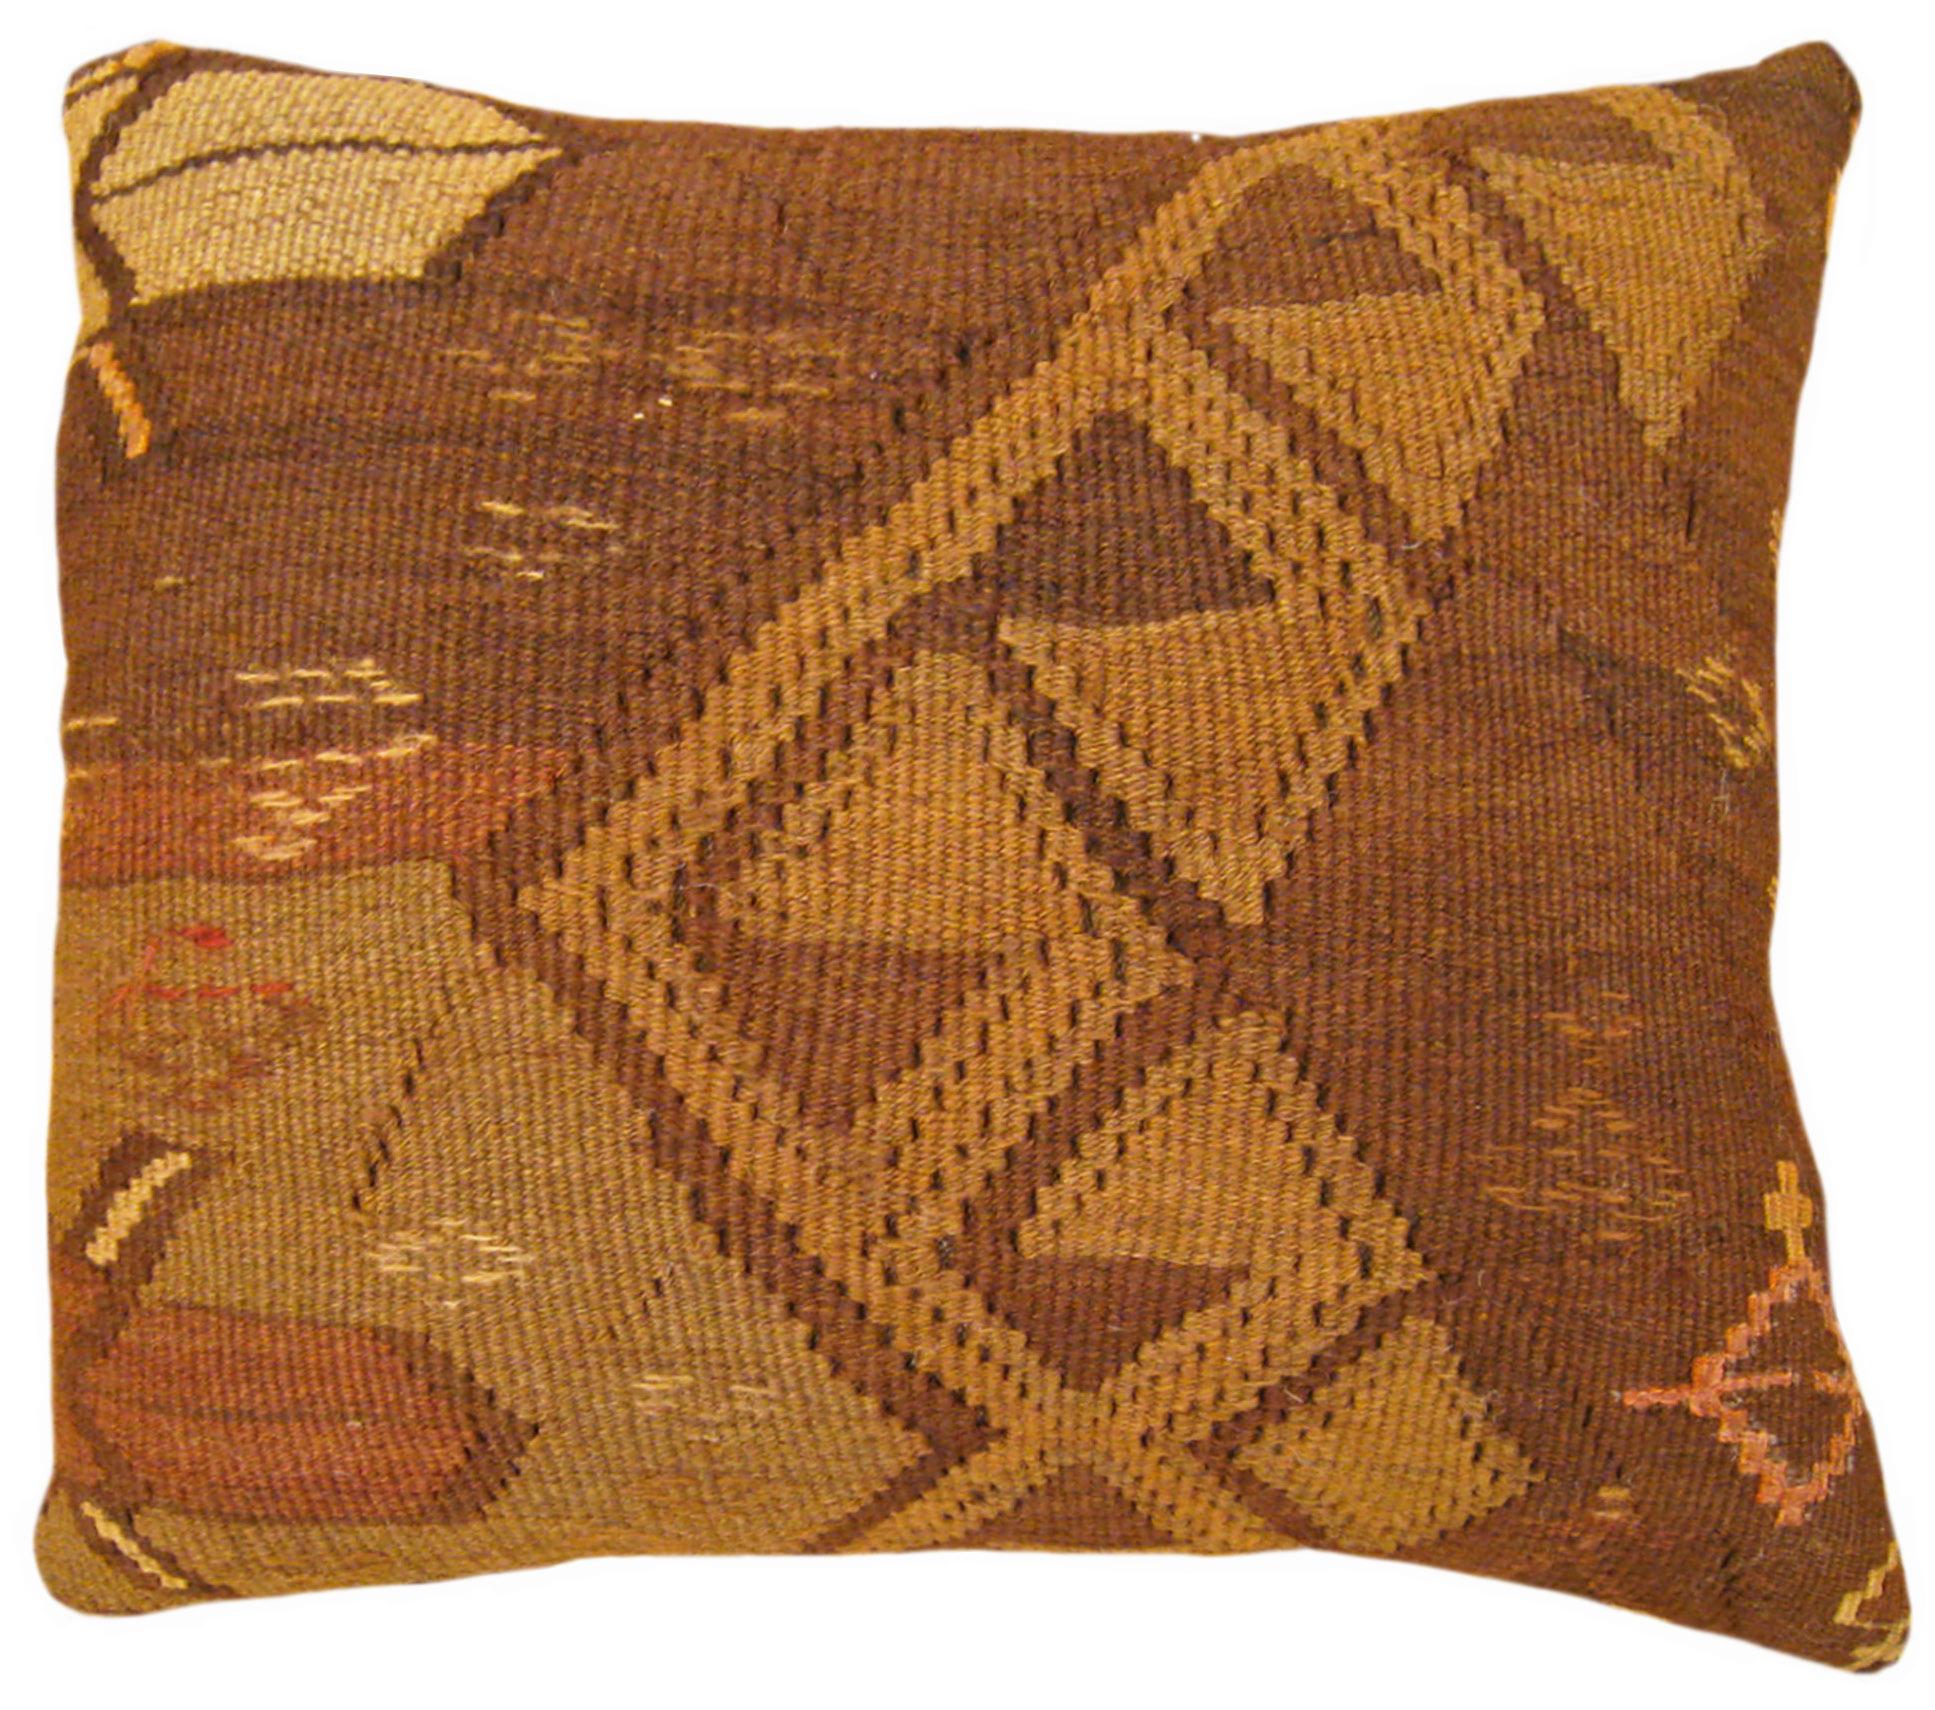 A Set of Decorative Vintage Turkish Kilim Pillows with Geometric Abstracts For Sale 8